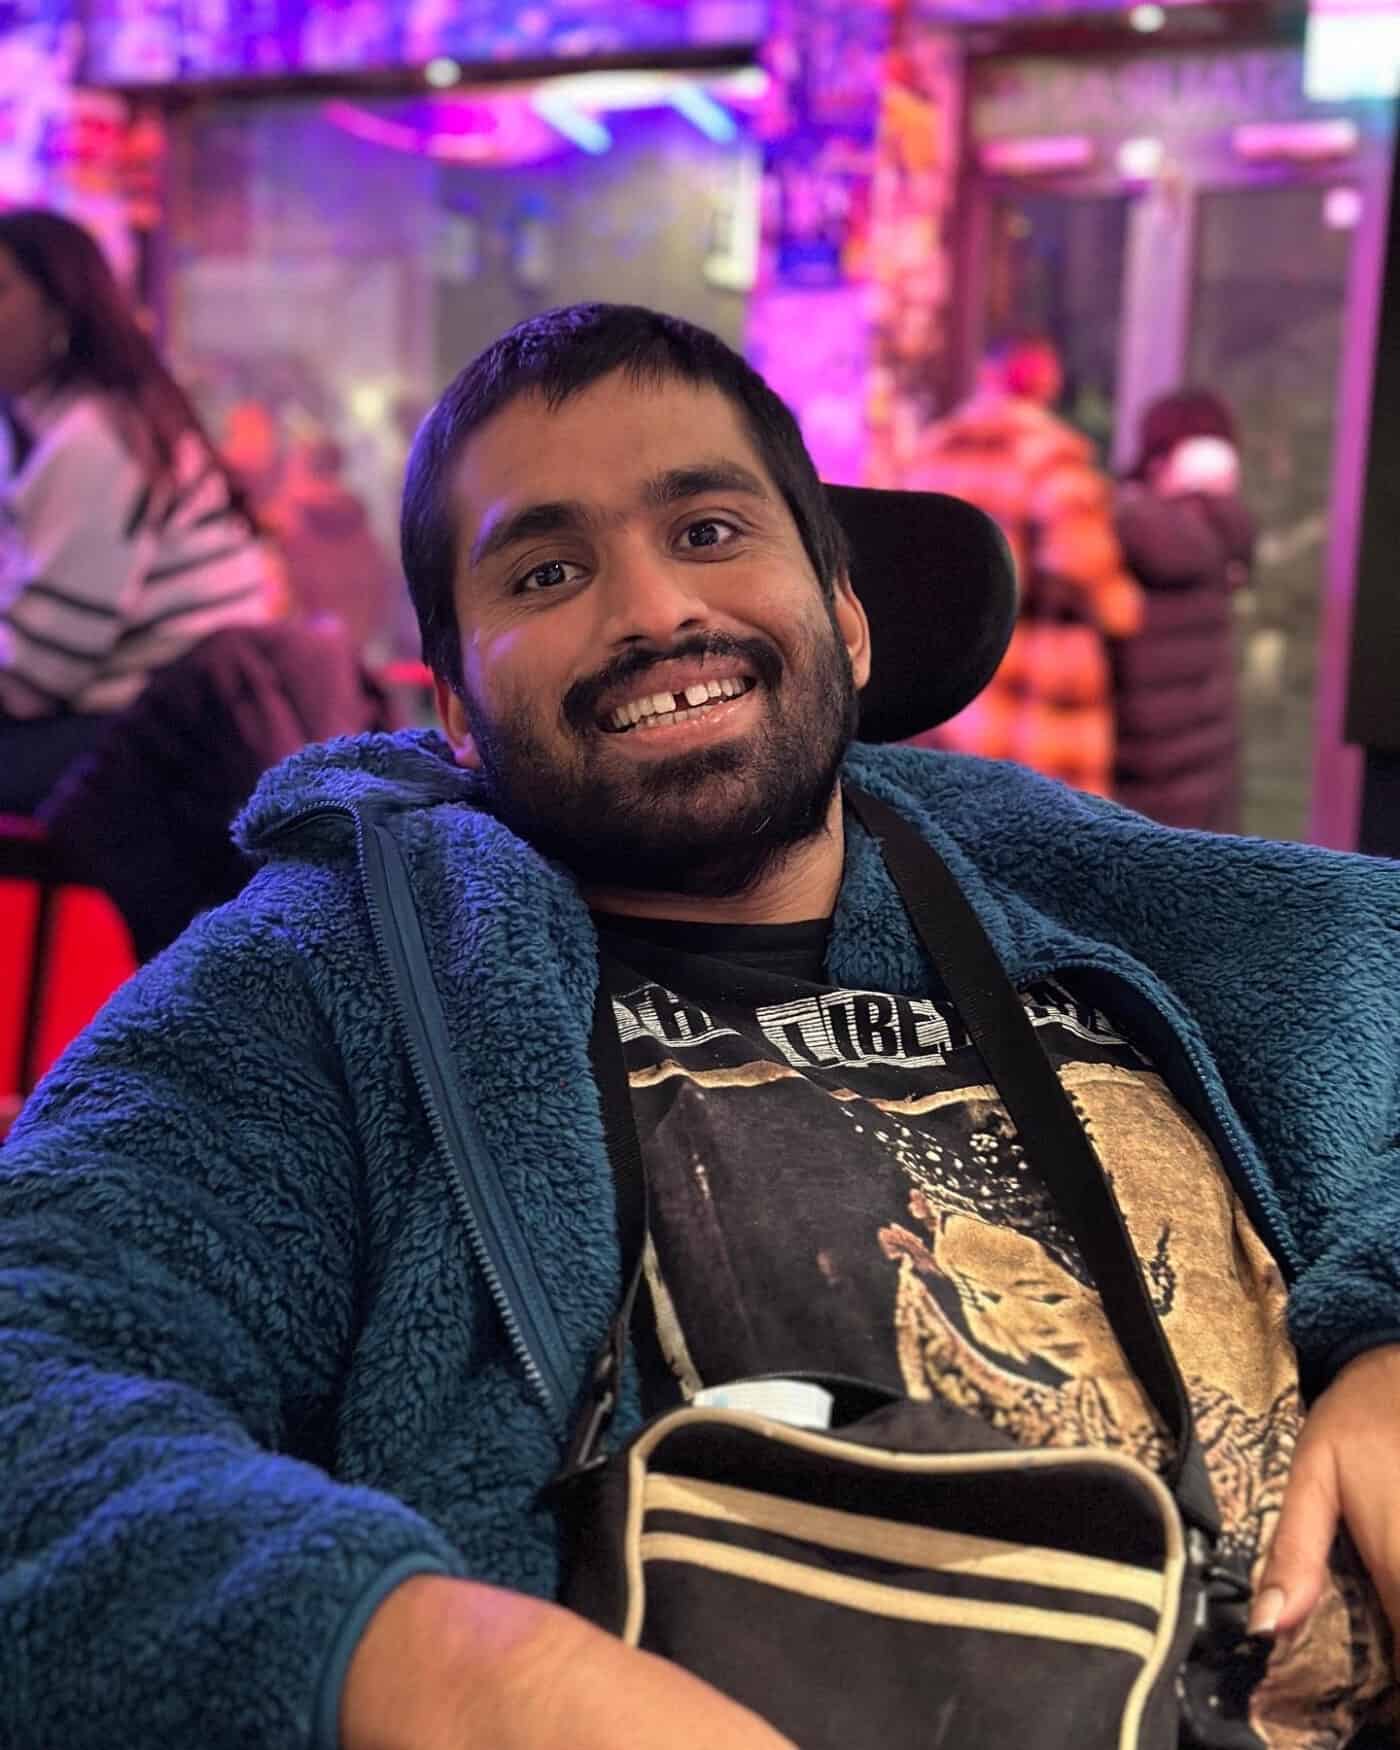 Photo of Jamil Dhillon. Jamil is wearing a blue fluffy jacket and black t shirt sitting in his powerchair with a small manbag slung over his left shoulder.